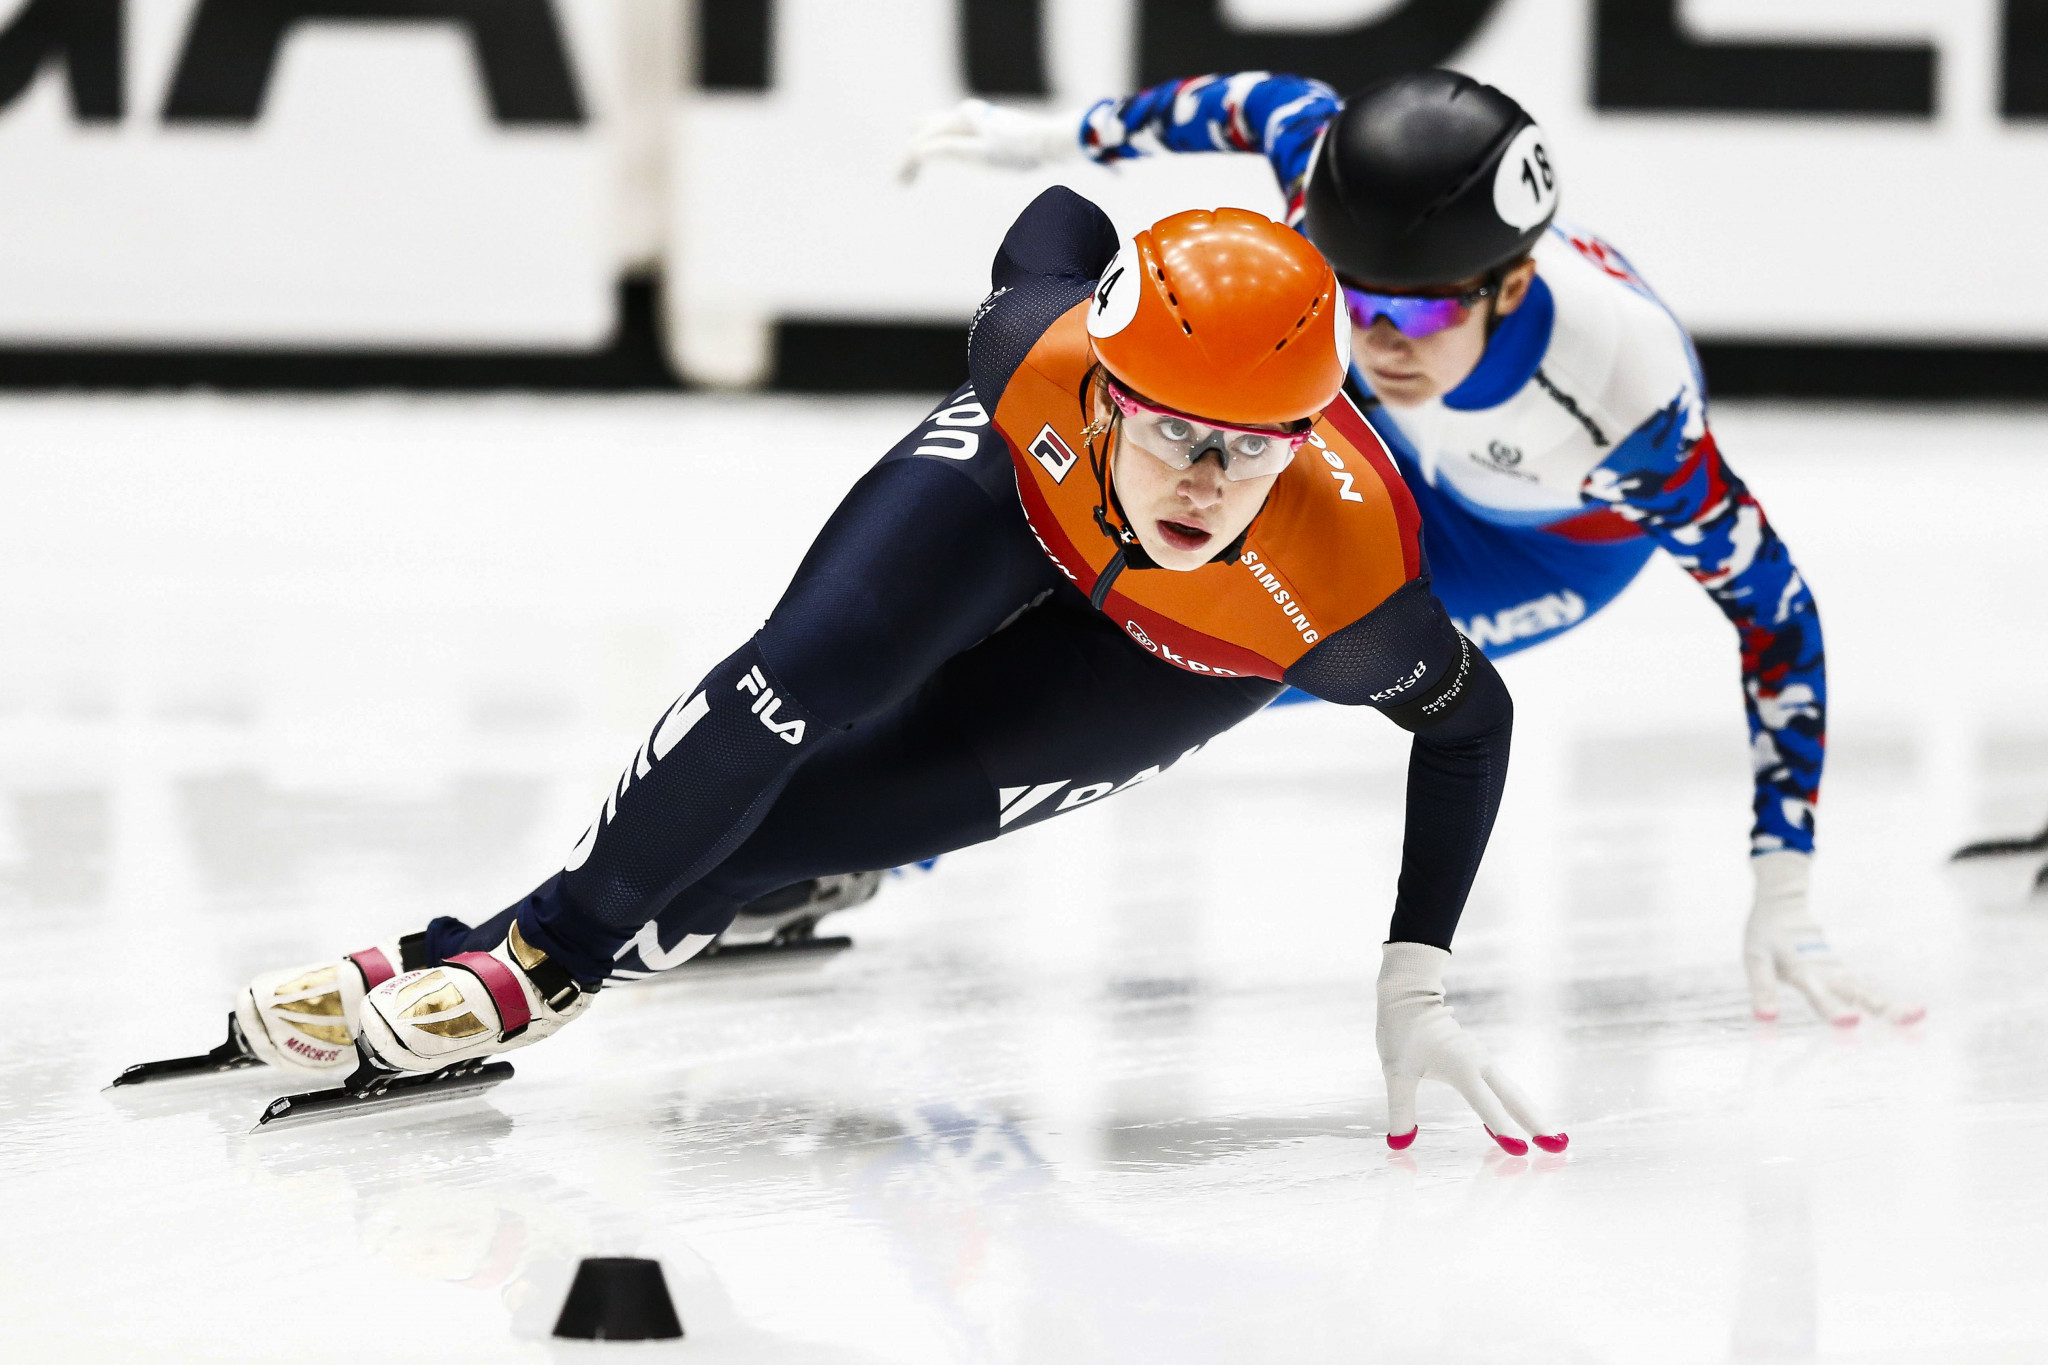 Schulting extends Short Track World Cup lead with 1,000m victory in Dresden